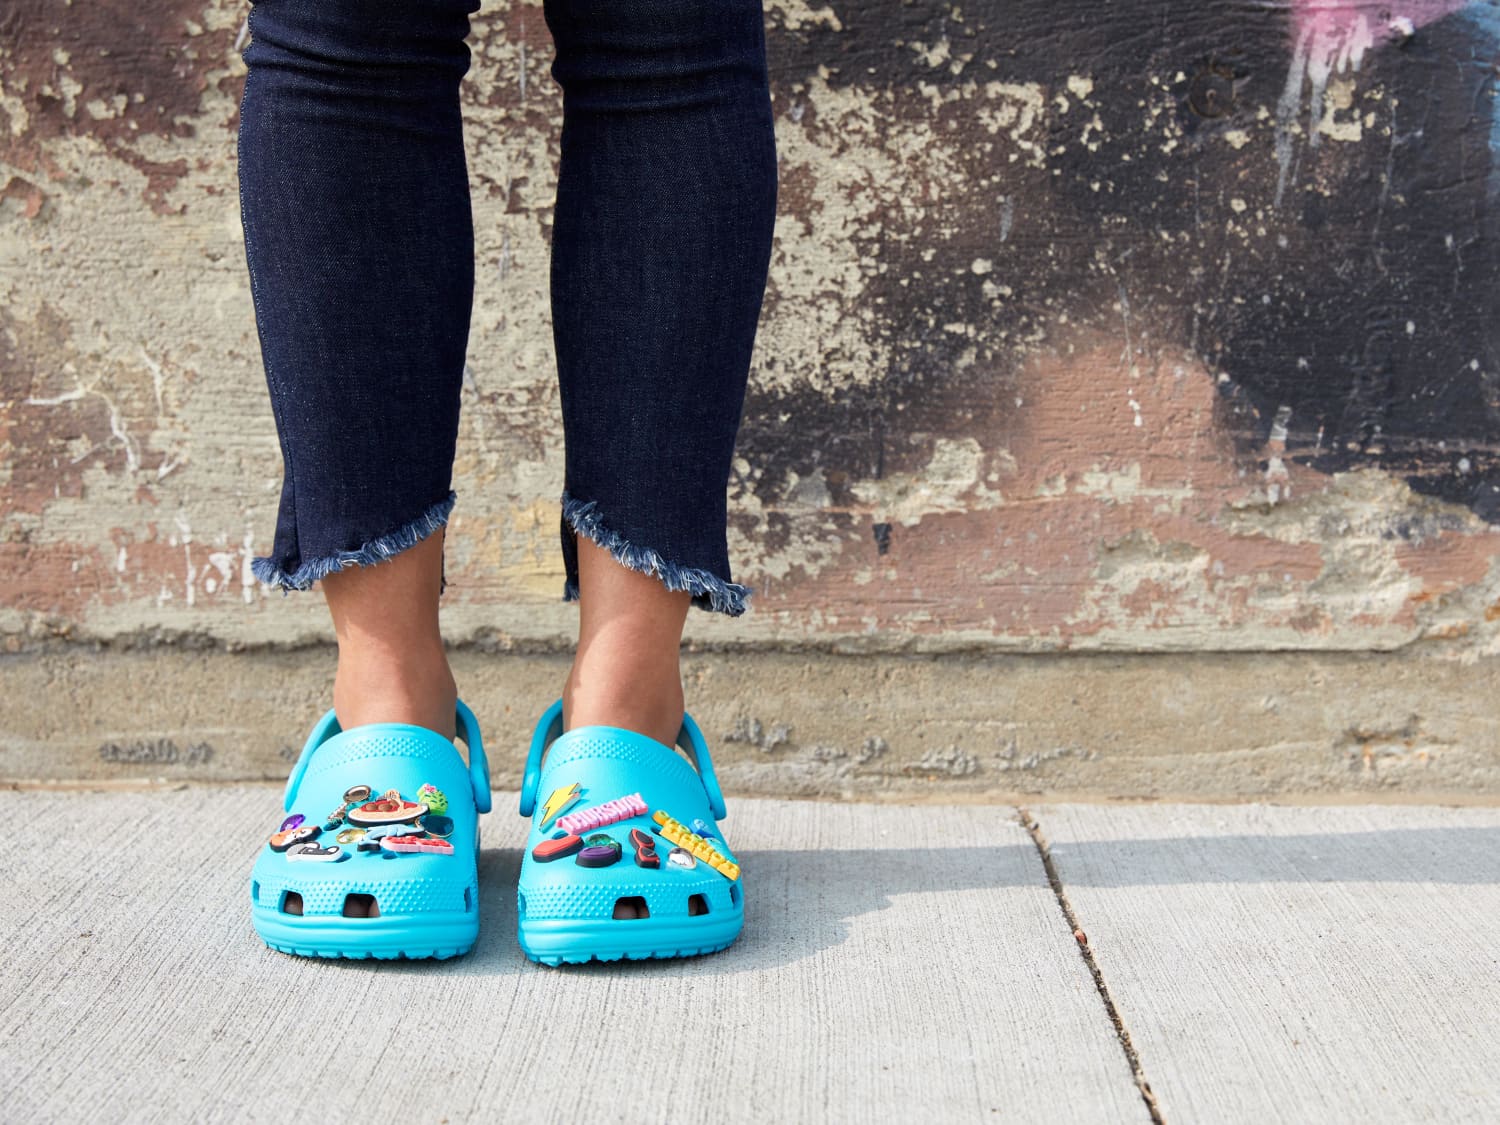 Eksempel mesterværk syndrom An Honest Review of Crocs as House Shoes | Apartment Therapy